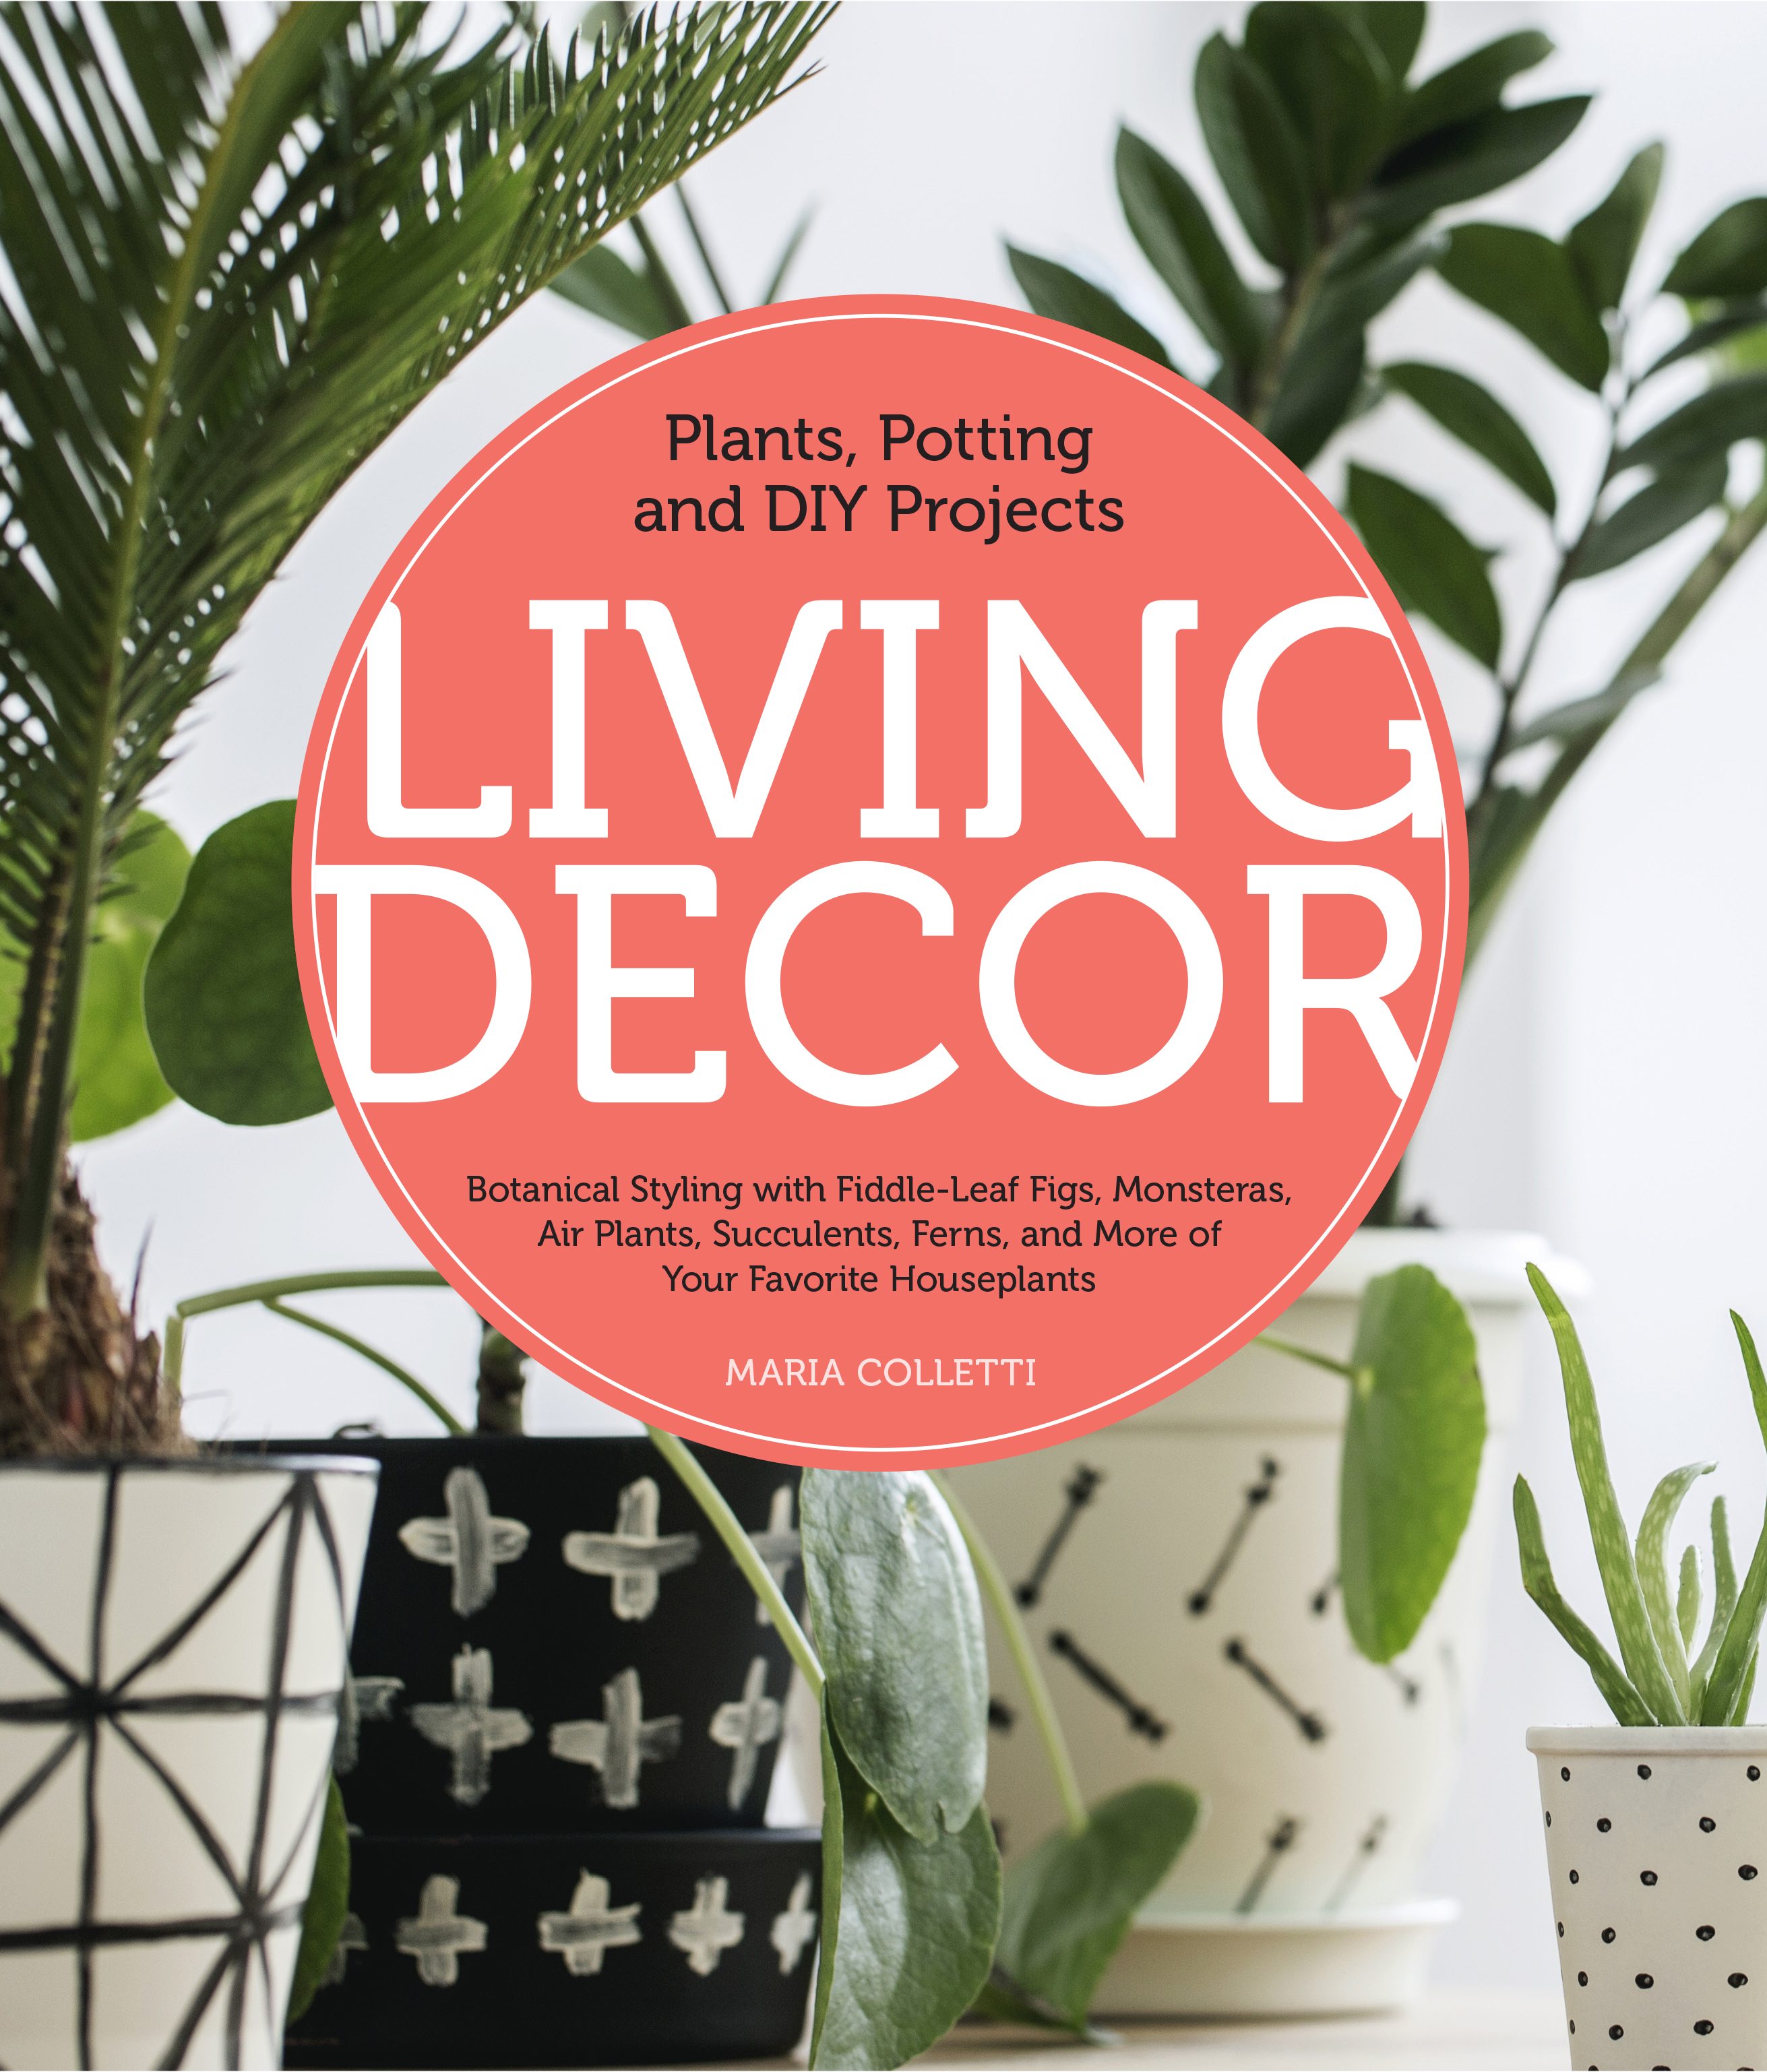 Umschlagbild für Living Decor [electronic resource] : Plants, Potting and DIY Projects - Botanical Styling with Fiddle-Leaf Figs, Monsteras, Air Plants, Succulents, Ferns, and More of Your Favorite Houseplants